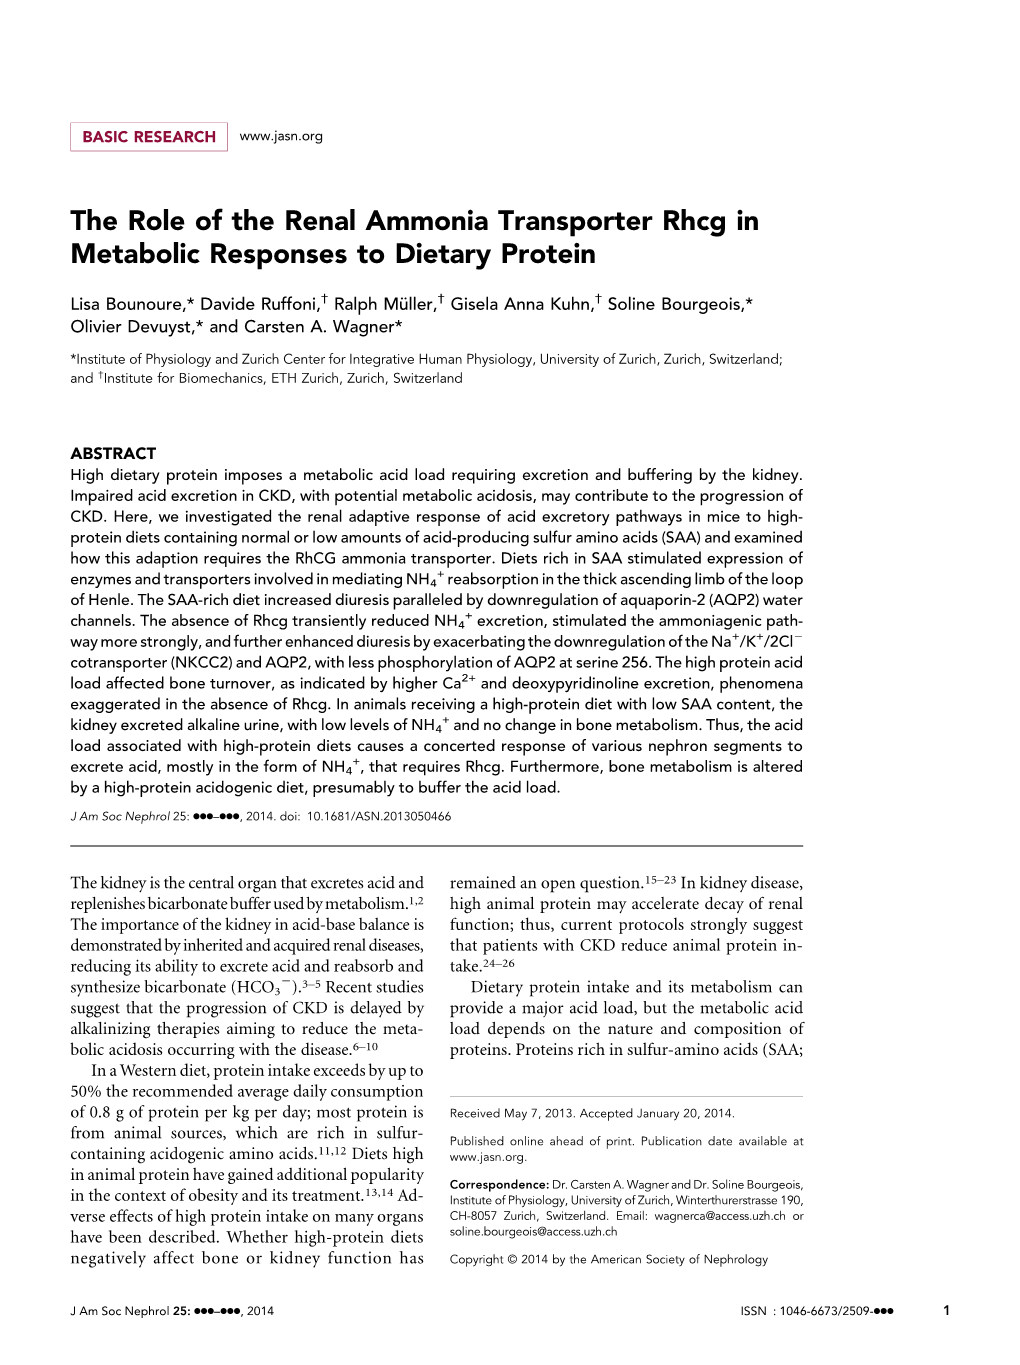 The Role of the Renal Ammonia Transporter Rhcg in Metabolic Responses to Dietary Protein